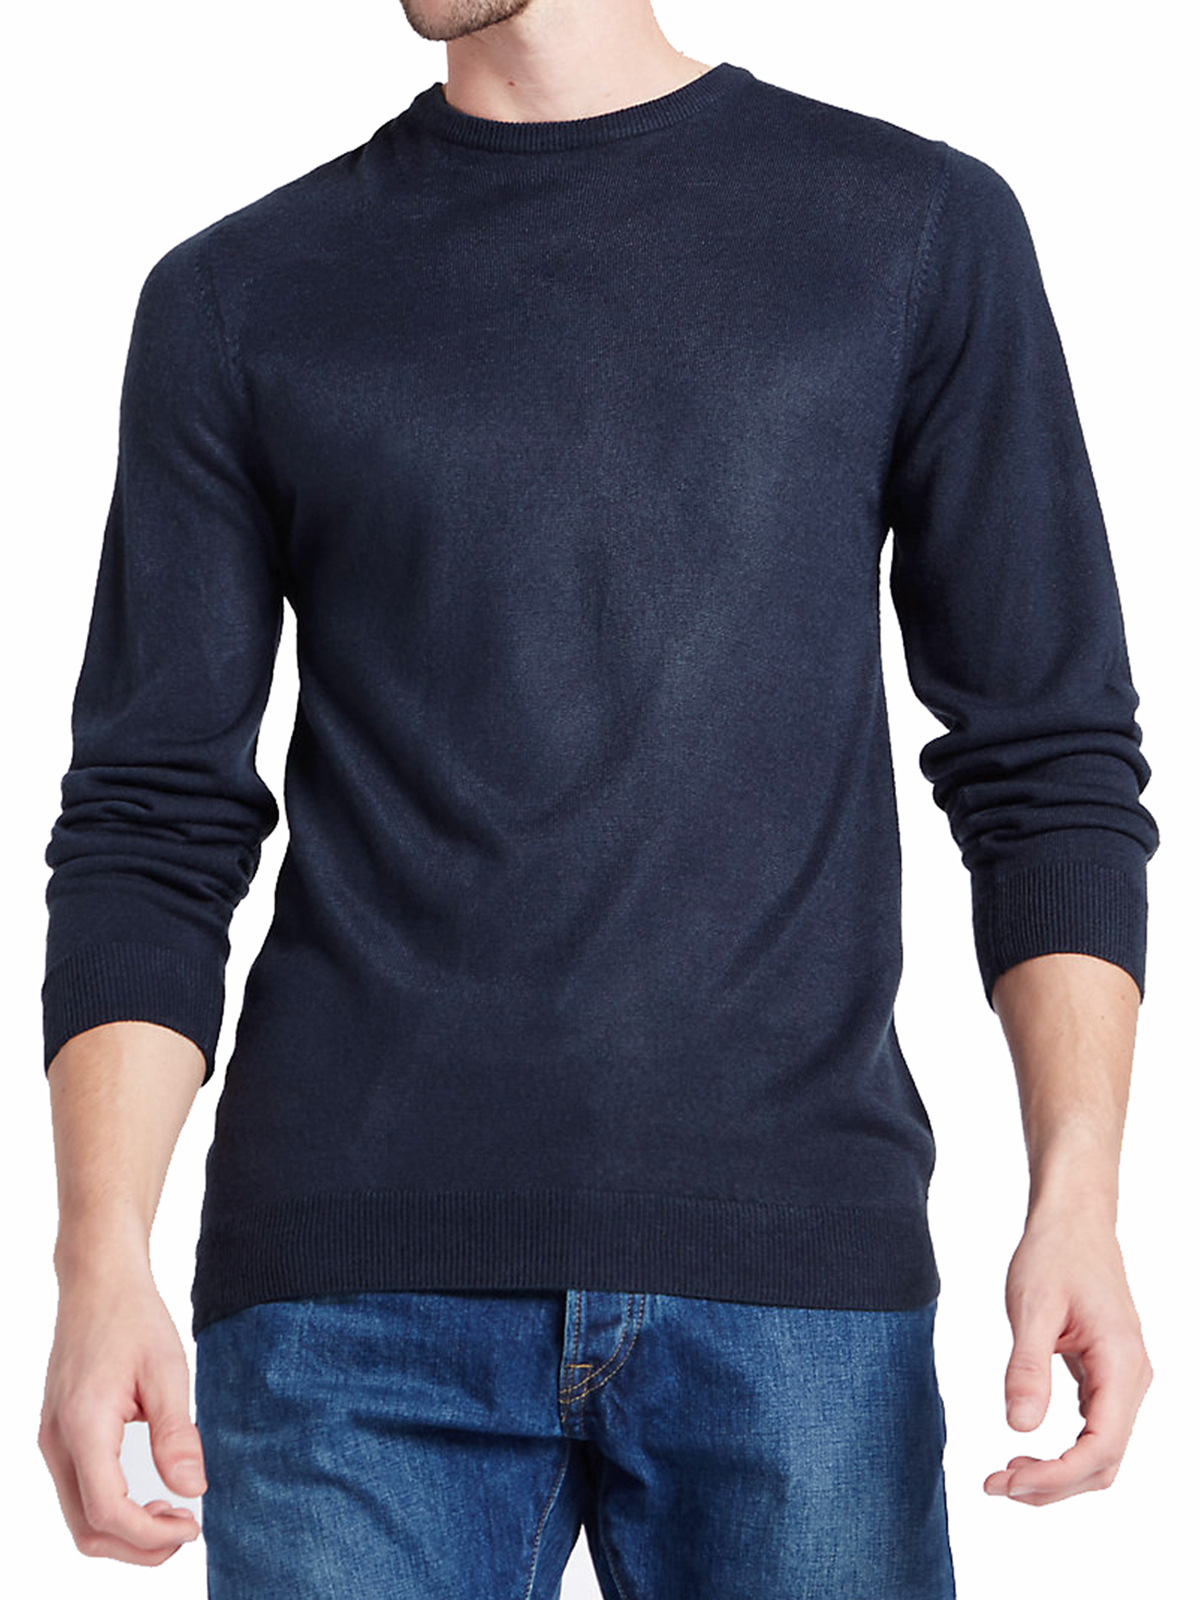 Marks and Spencer - - M&5 Mens NAVY Crew Neck Jumper - Size Small to to ...